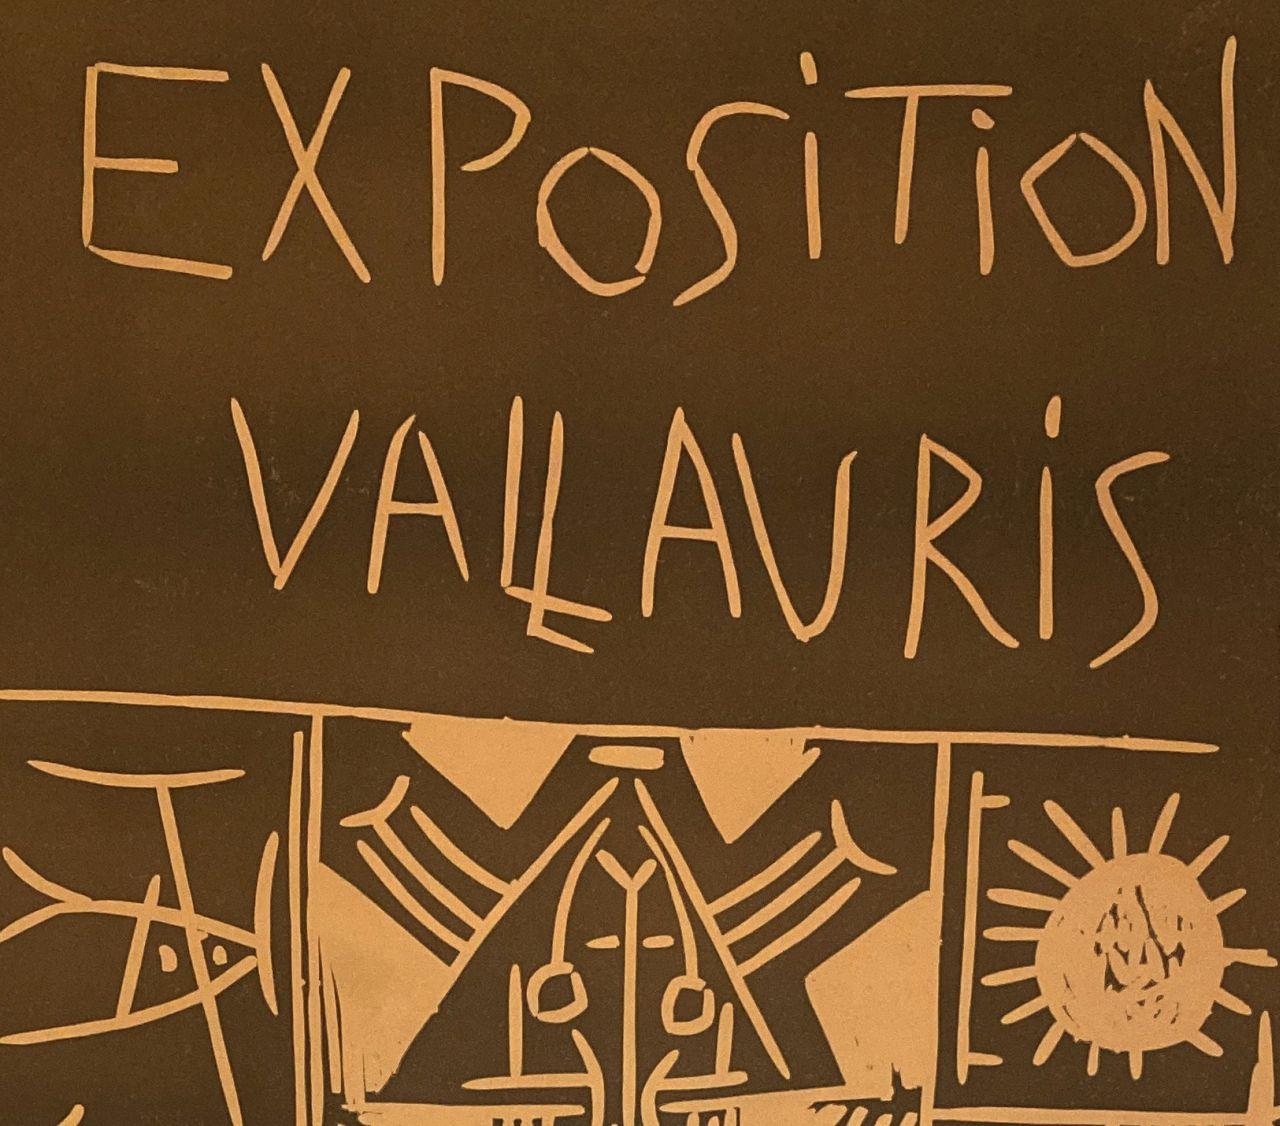 Exposition Vallauris 1961 - Original Linocut Signed in the Plate - Bloch 1295 - Modern Print by Pablo Picasso